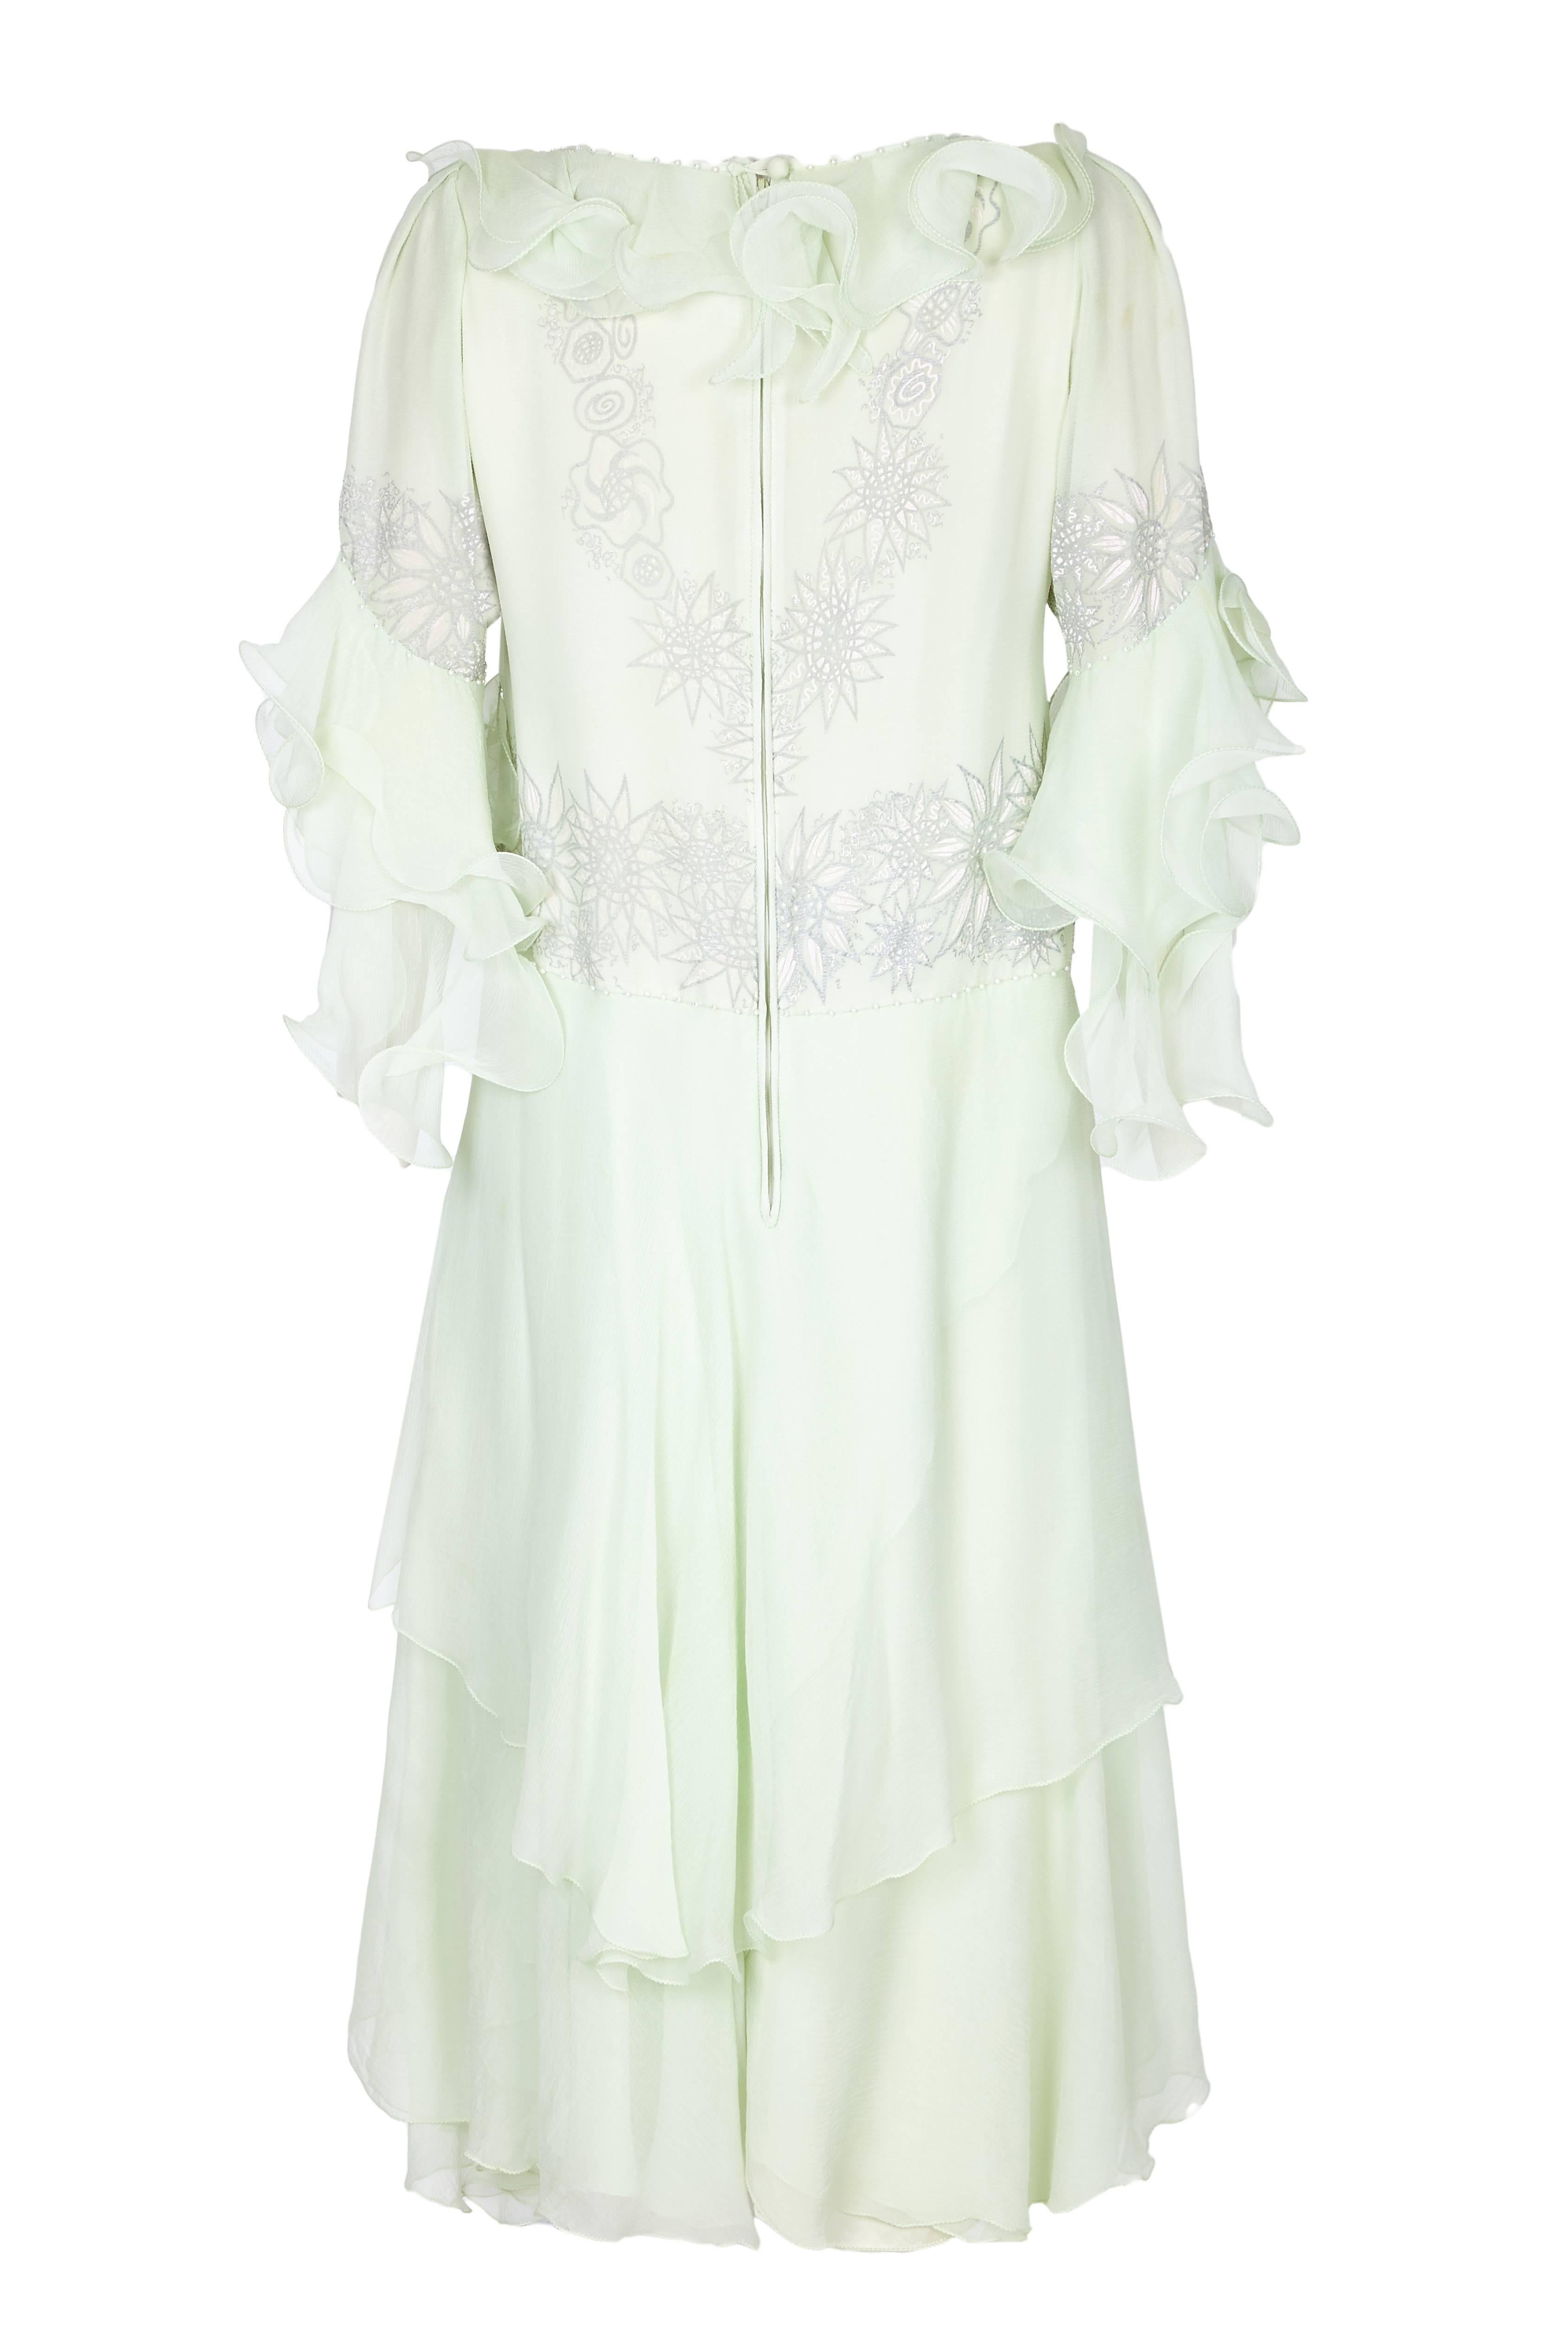 Amazing vintage 1980s Zandra Rhodes couture pale green chiffon dress. The dress is decorated with a beautiful hand painted white and grey floral design interspersed with scattered pearls and rhinestones. The dress is straight cut with no waist